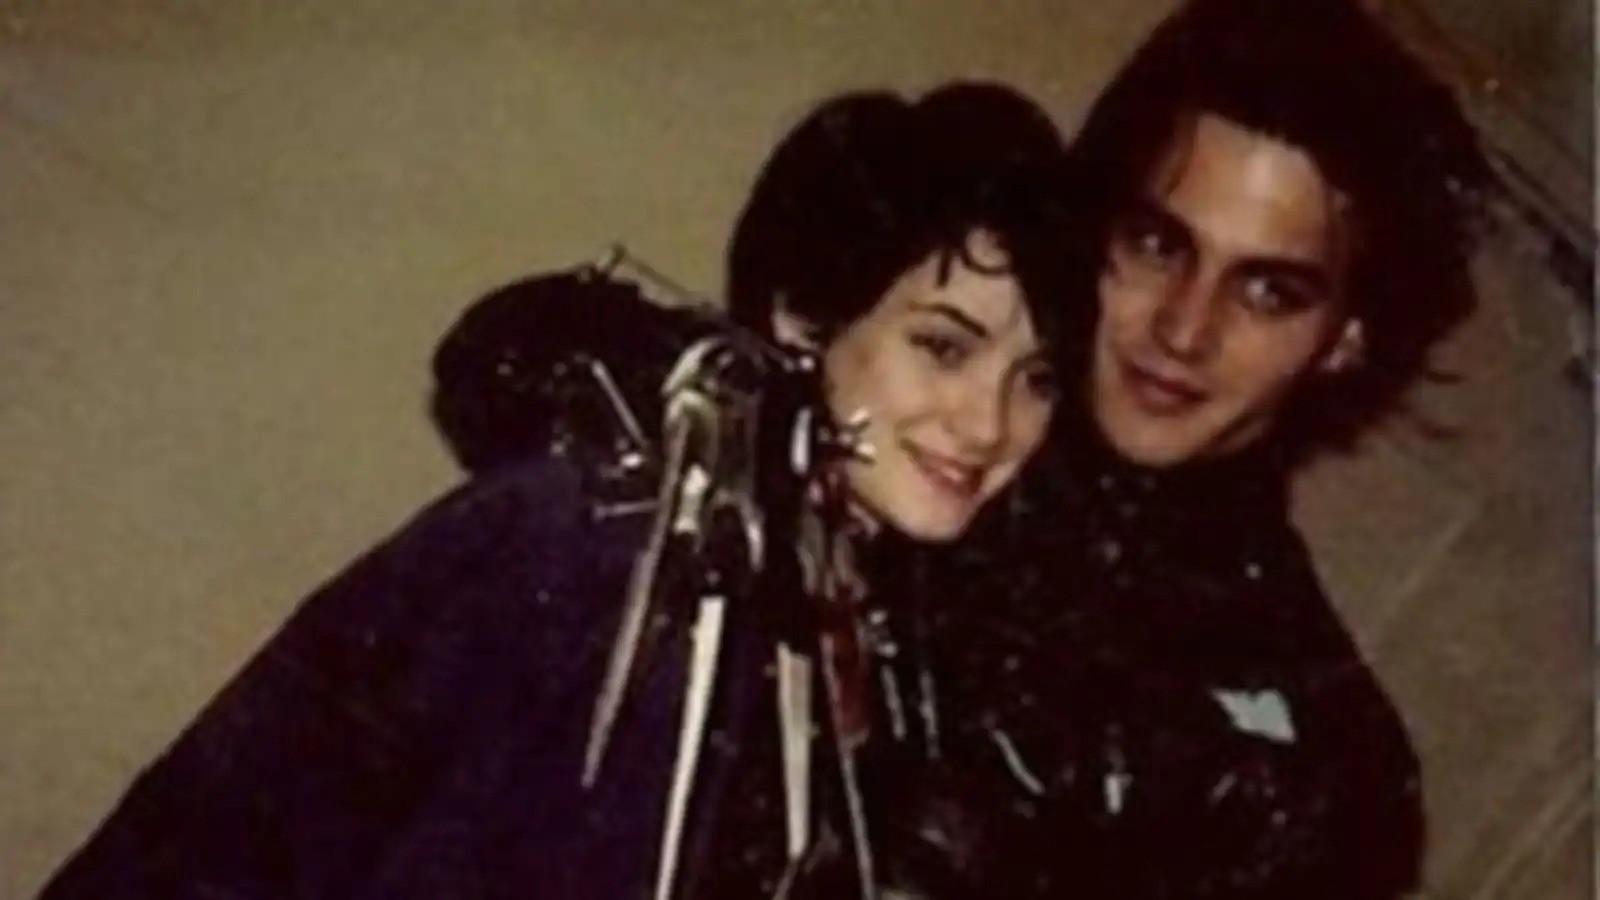 Johnny Depp photographed with Winona Ryder on the set of Edward Scissorhands